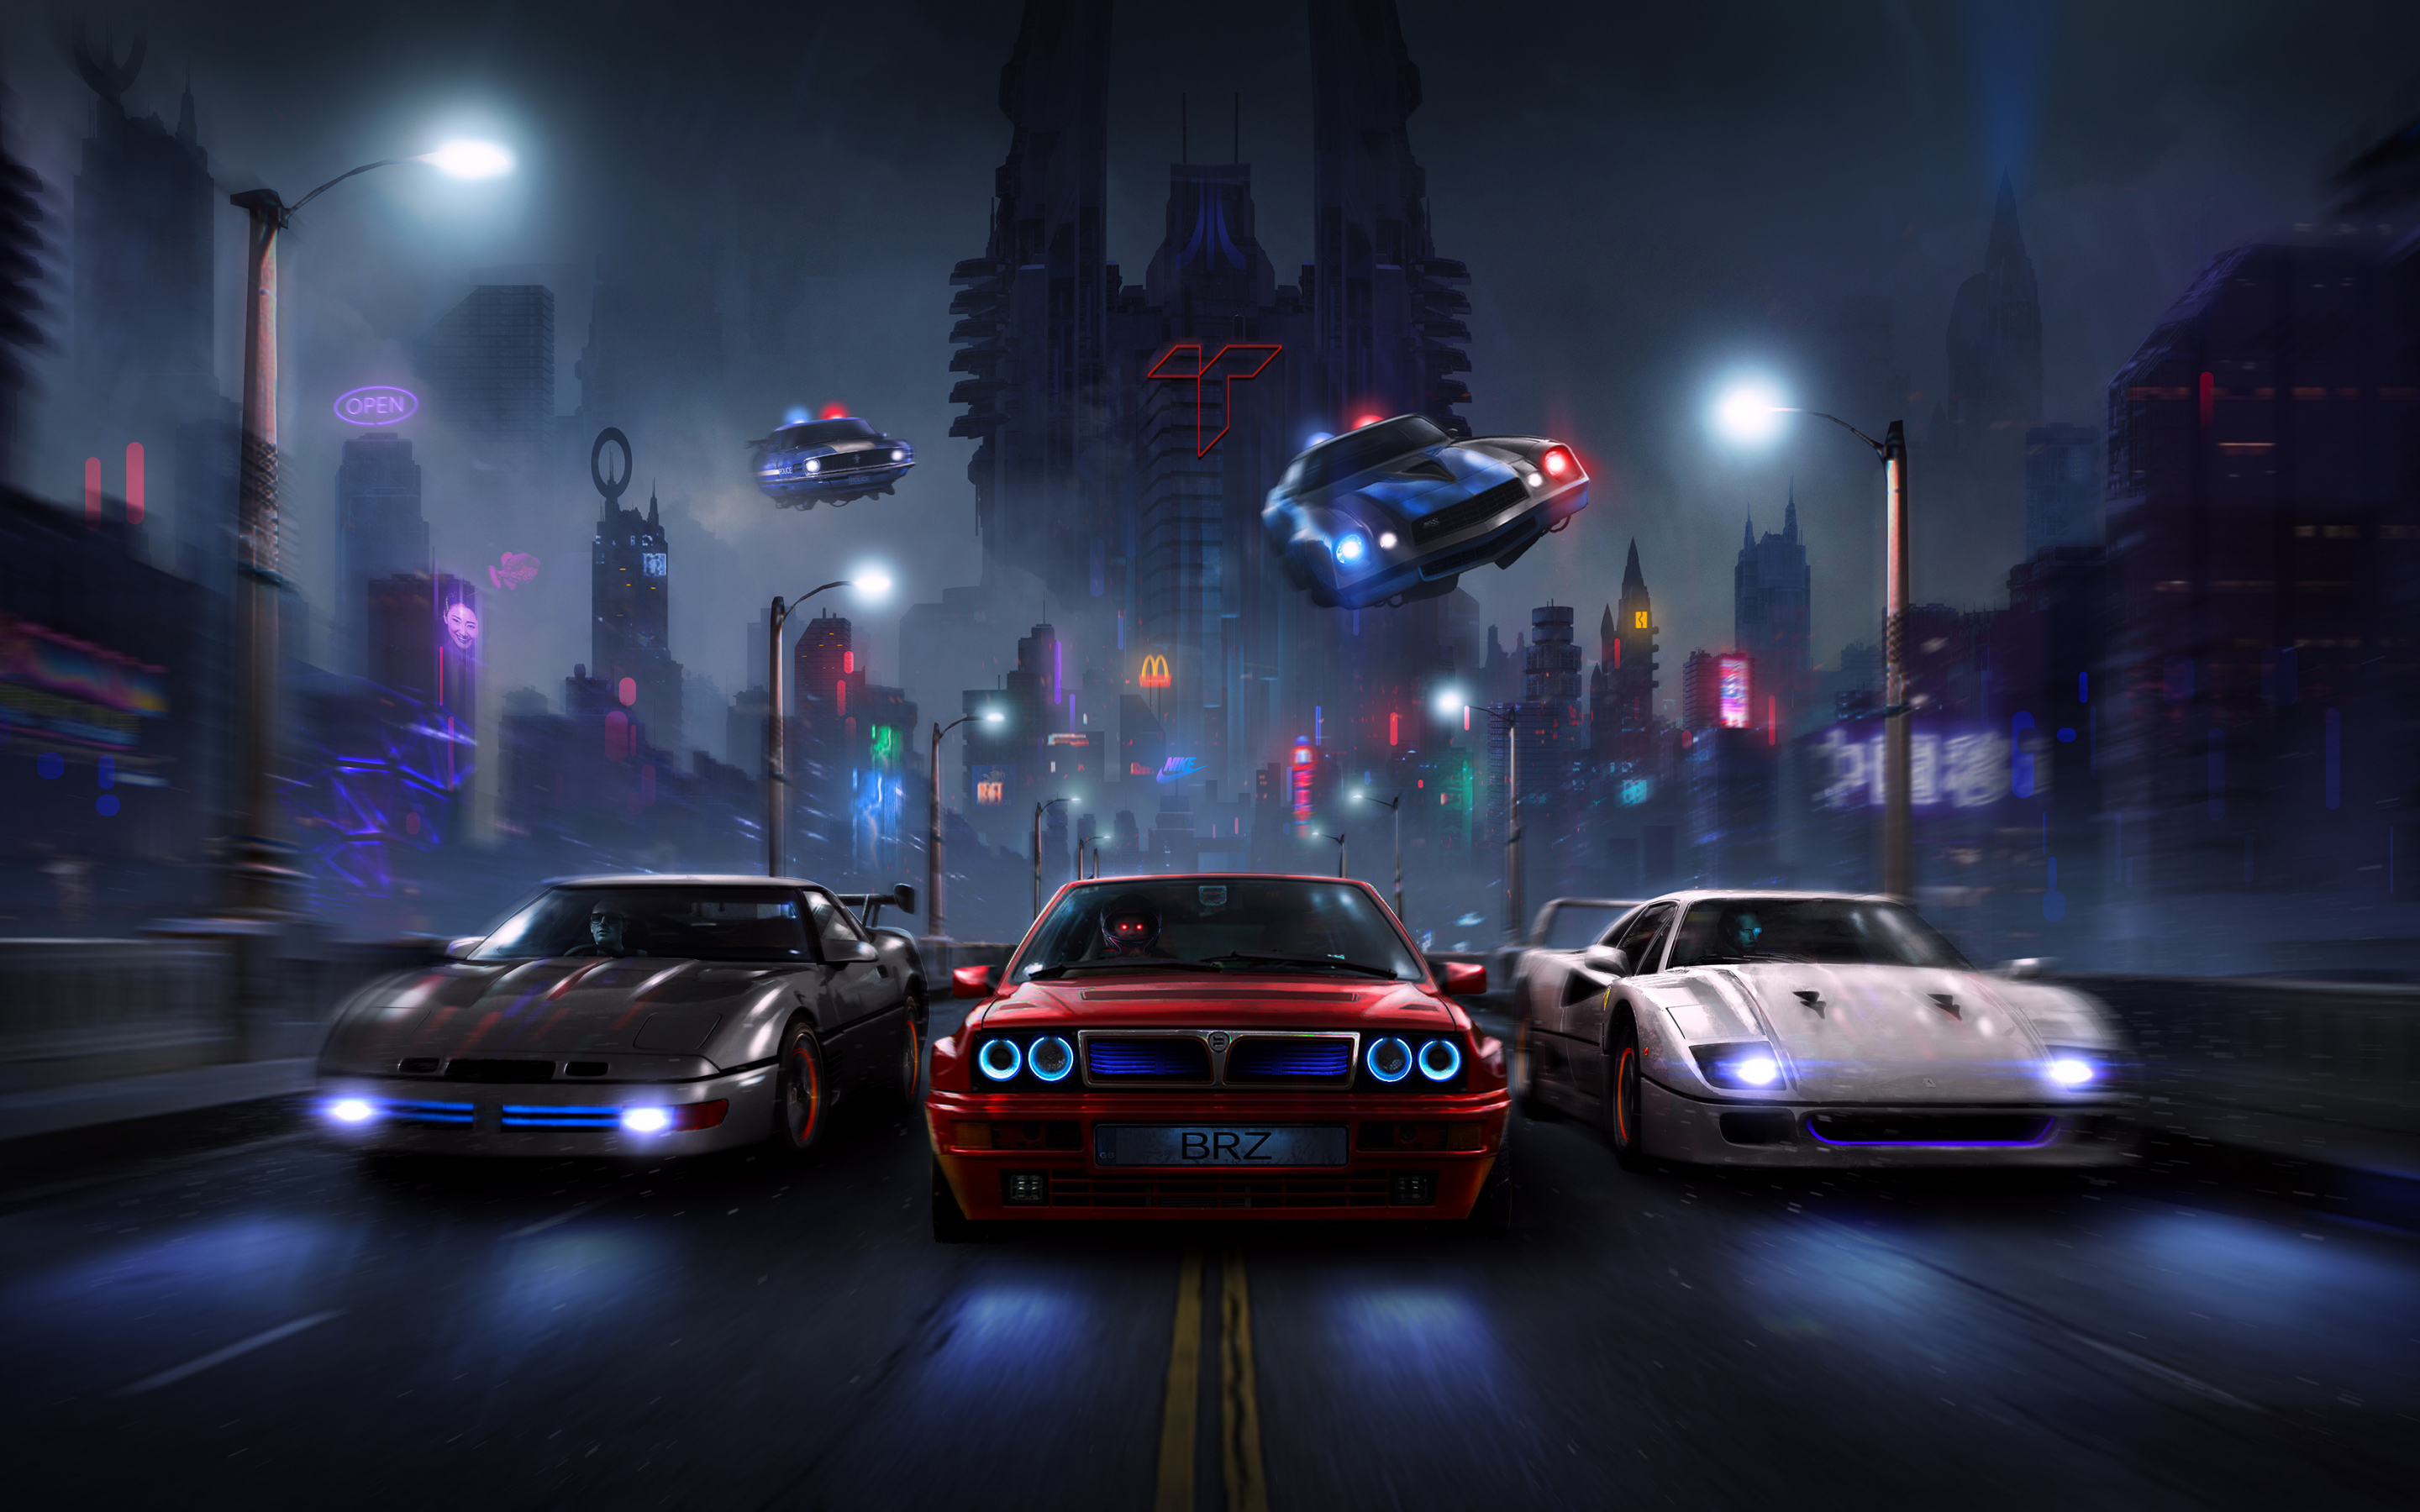 Racers night, chase, cars, 2880x1800 wallpaper